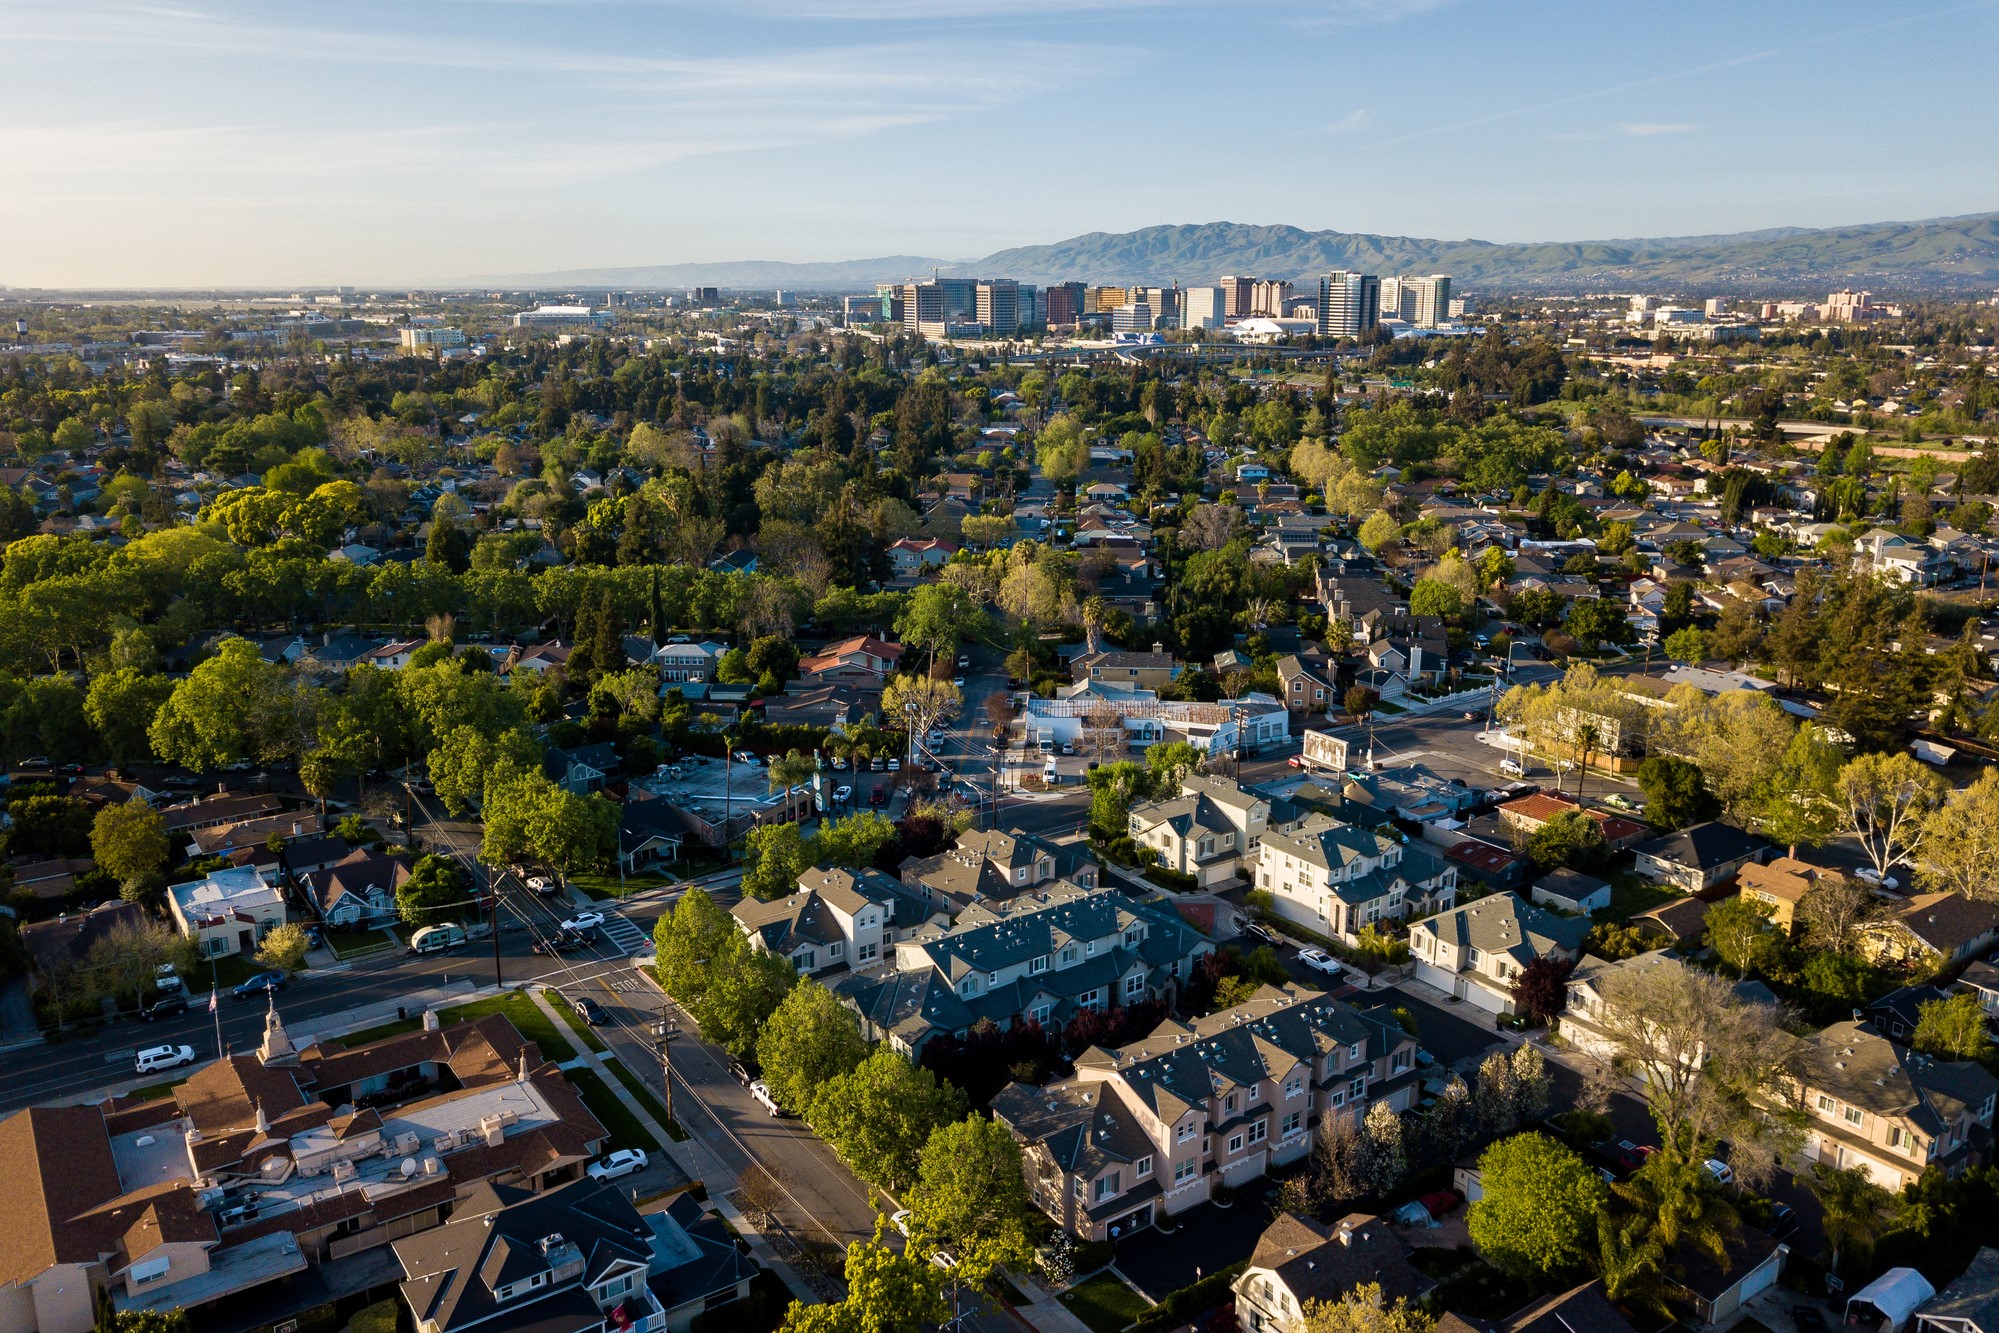 Drone point of view of Silicon Valley in California